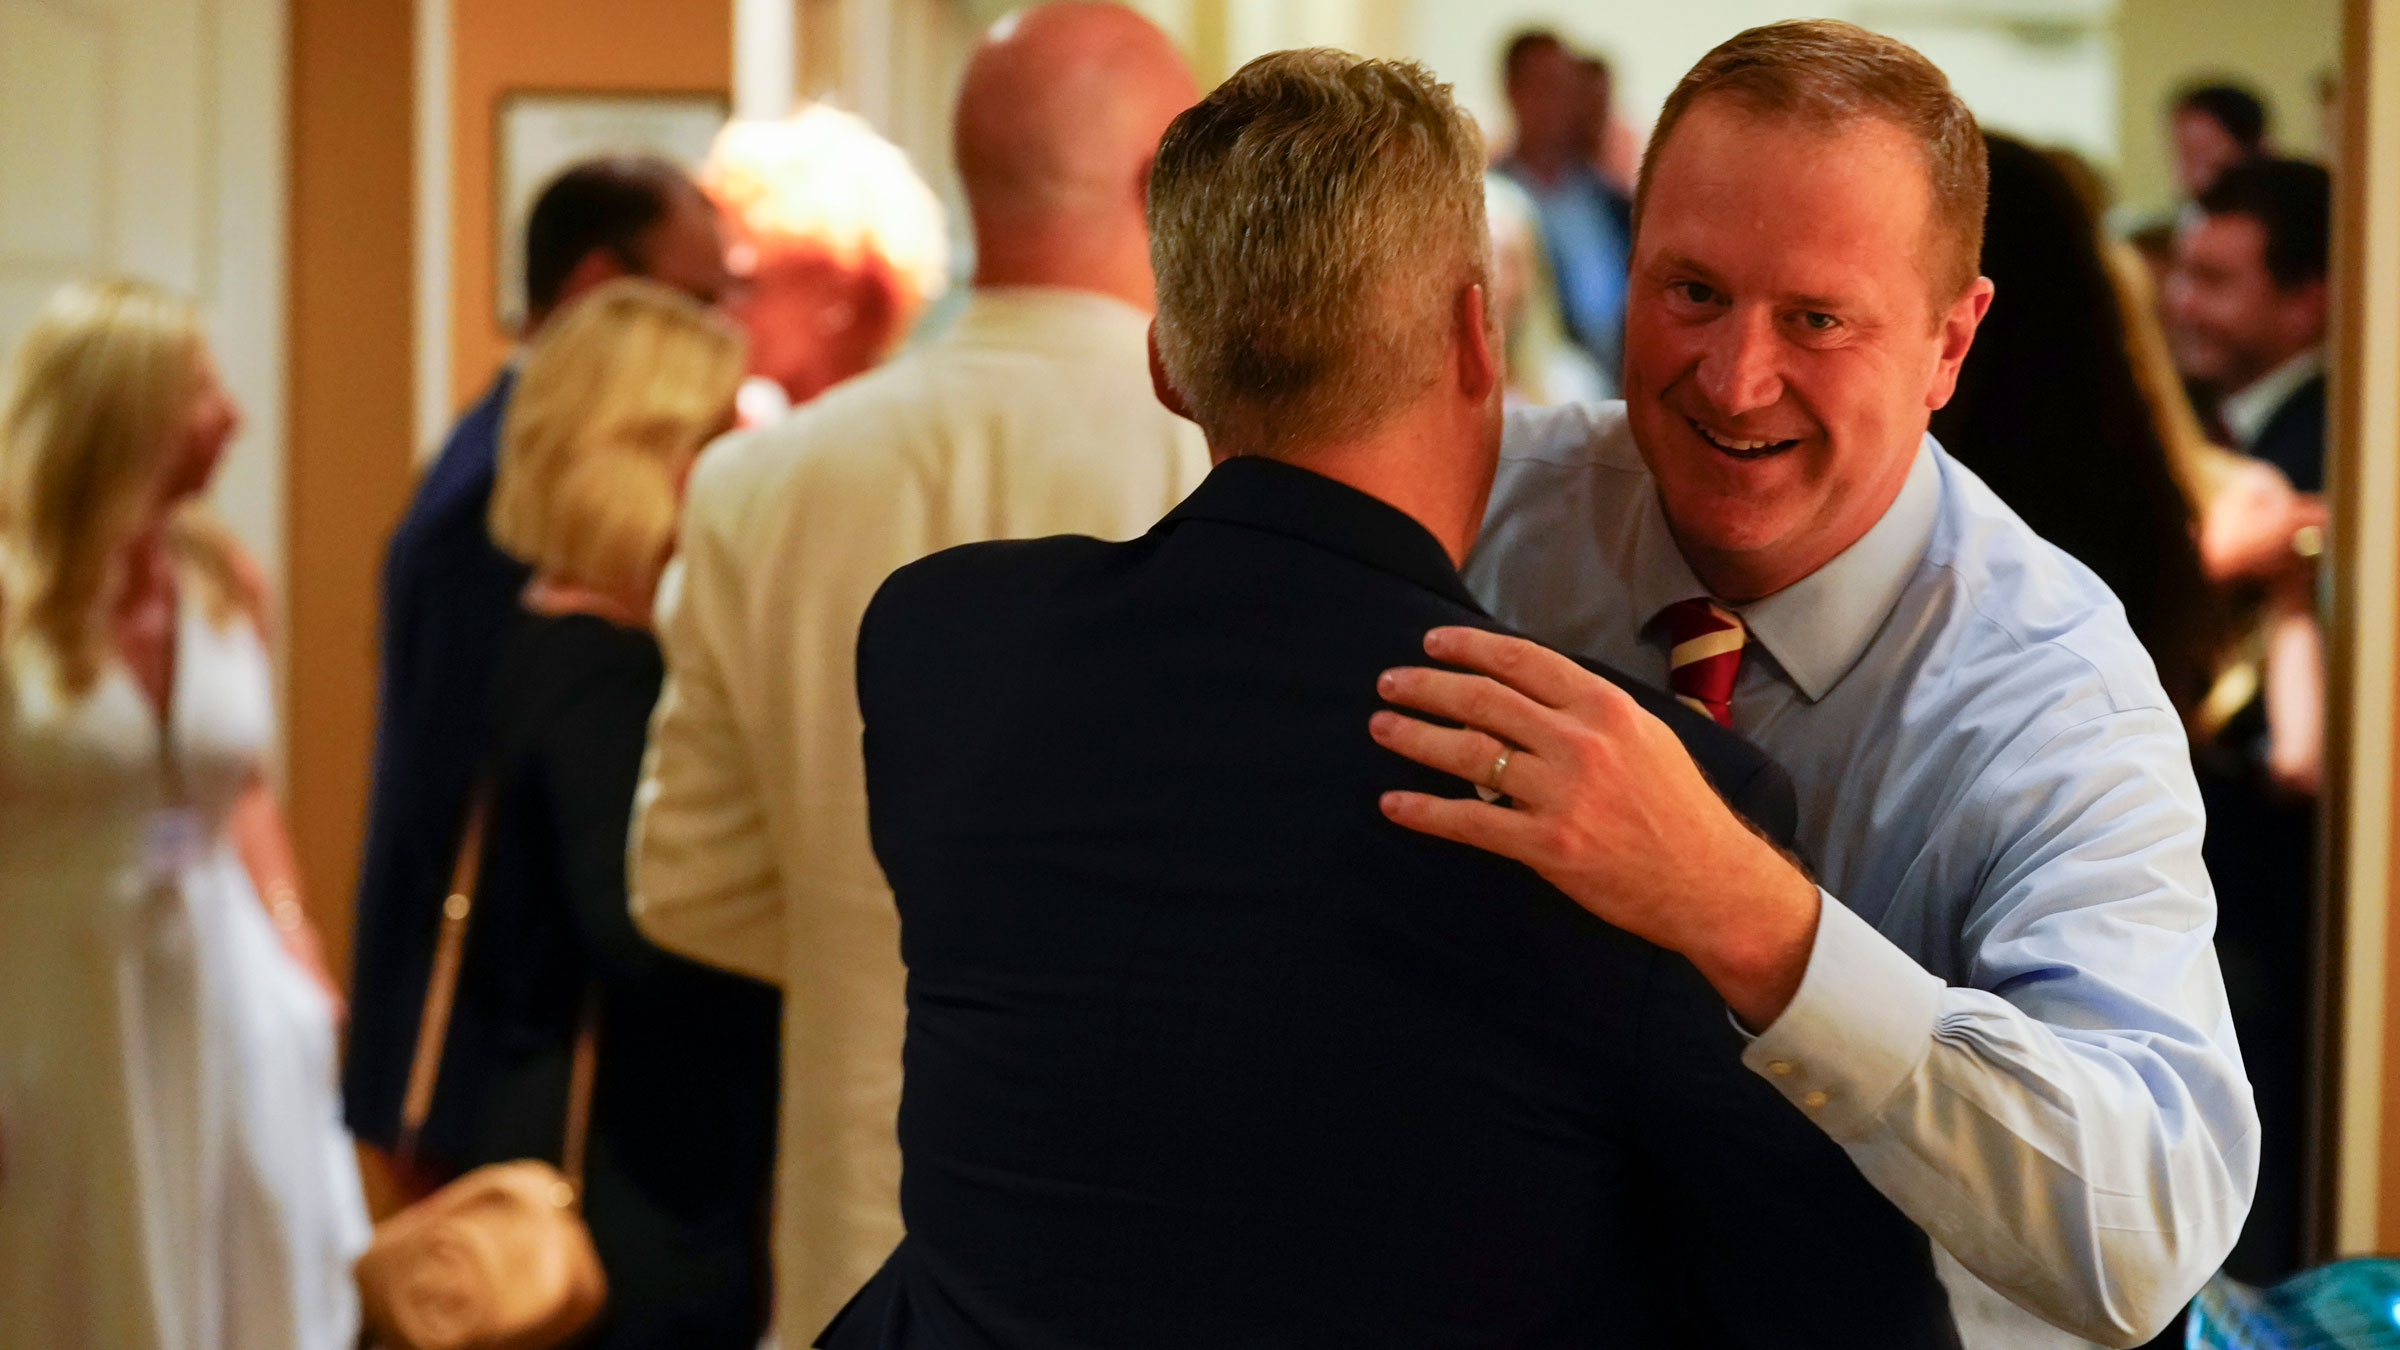 Eric Schmitt meets with supporters at his election night party in St. Louis on Tuesday.